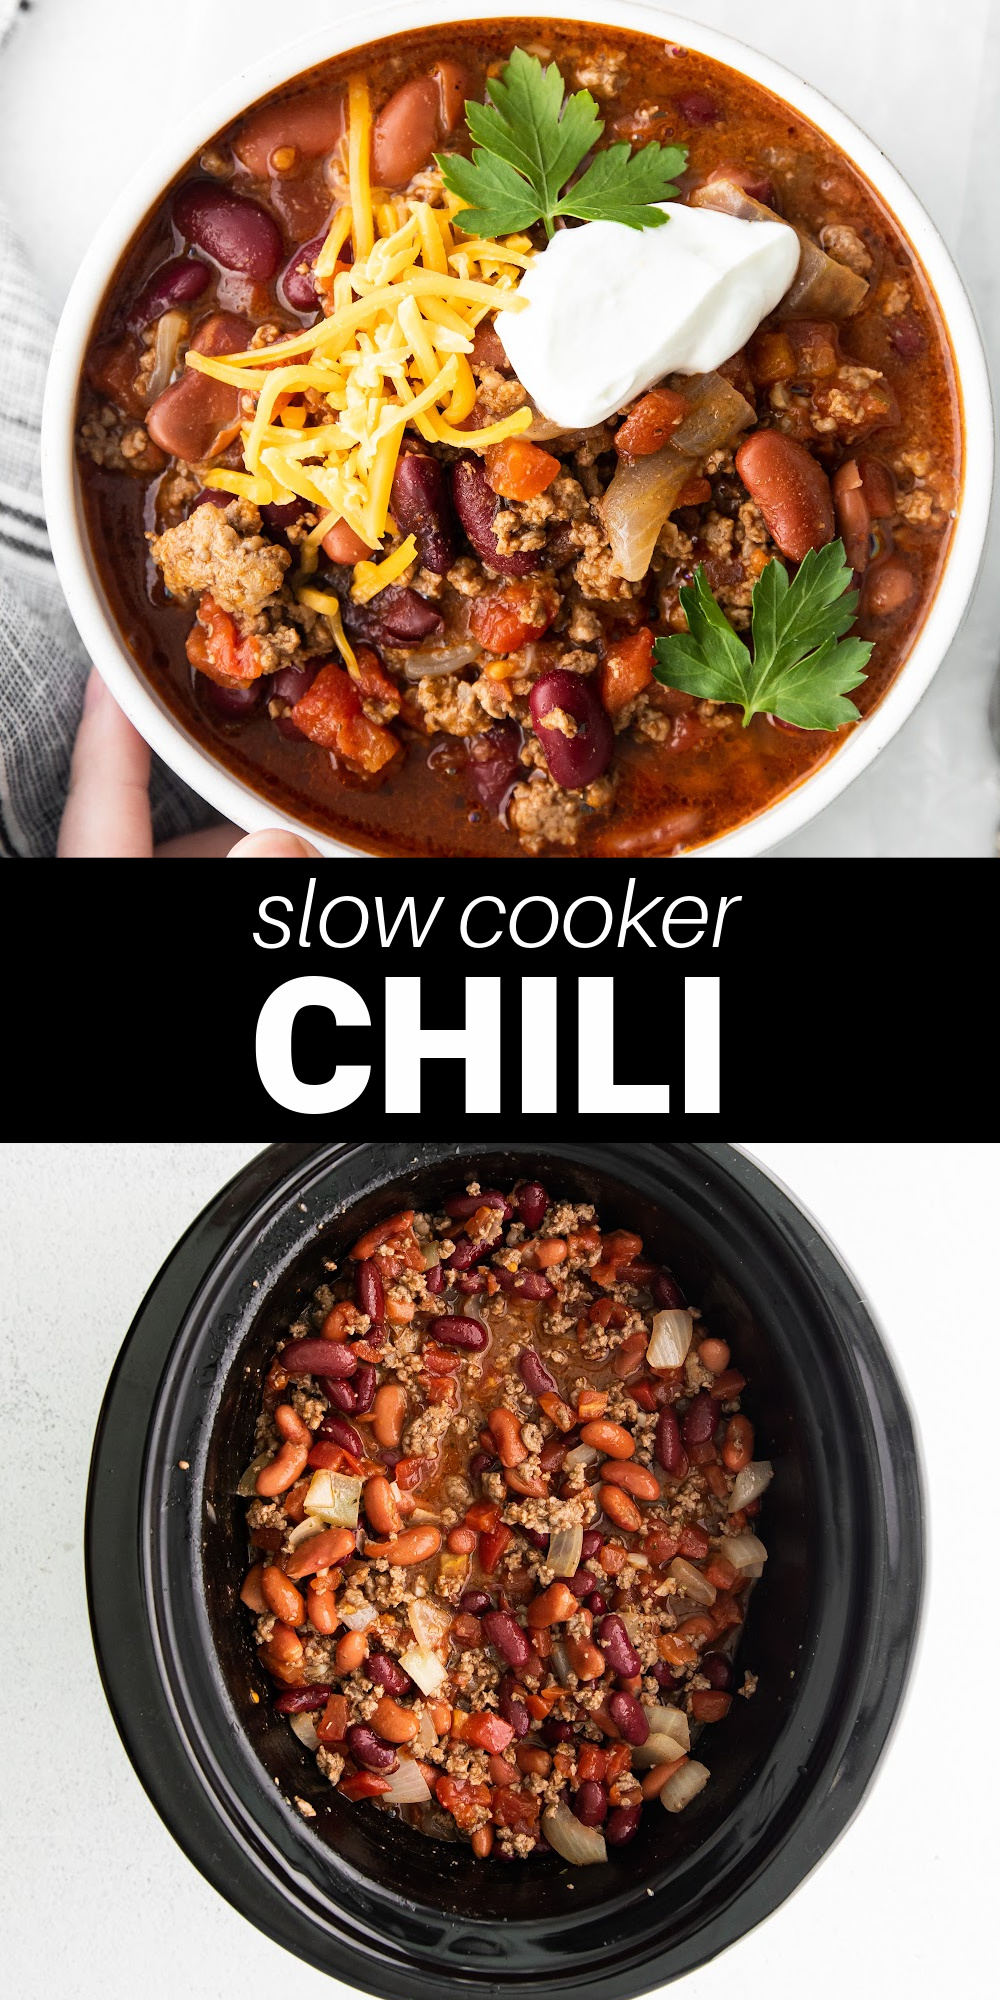 This simple slow cooker chili is the perfect hearty comfort food you're looking for! This easy slo cooker chili recipe is the perfect way to have flavor-packed beef chili on busy days.